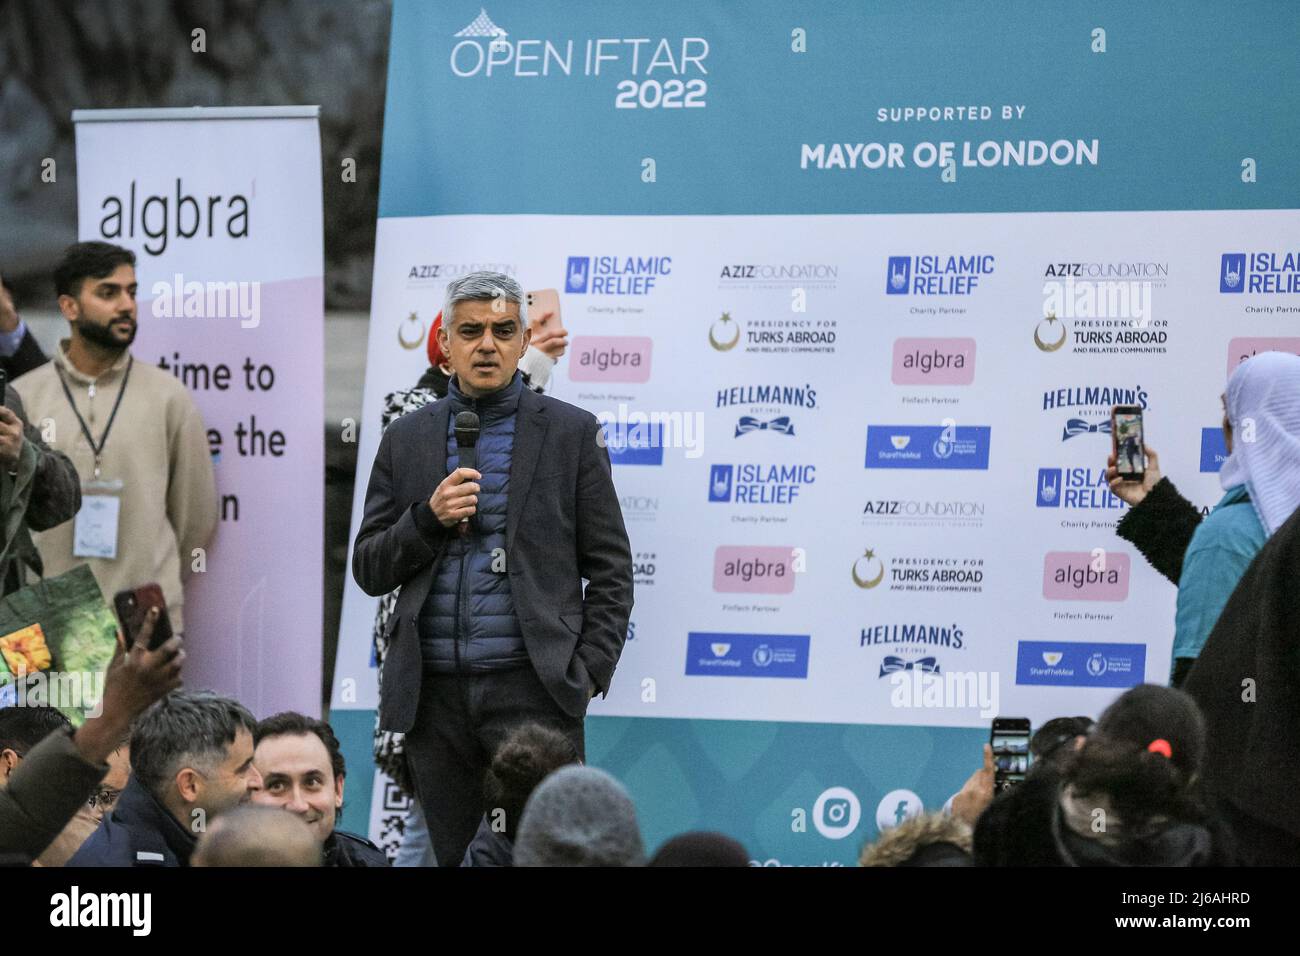 London, UK, 29th April 2022. Mayor of London Sadiq Khan speaks at the event. The UK's largest Open Iftar, organised bz Ramadan Tent Project, brings together people from all communities to share an Iftar (evening meal) to break fast during what is now the final week of the Islamic holy month of Ramadan. The event is attended by Sadiq Khan, Mayor of London, and around 2,000 members of the public. Credit: Imageplotter/Alamy Live News Stock Photo